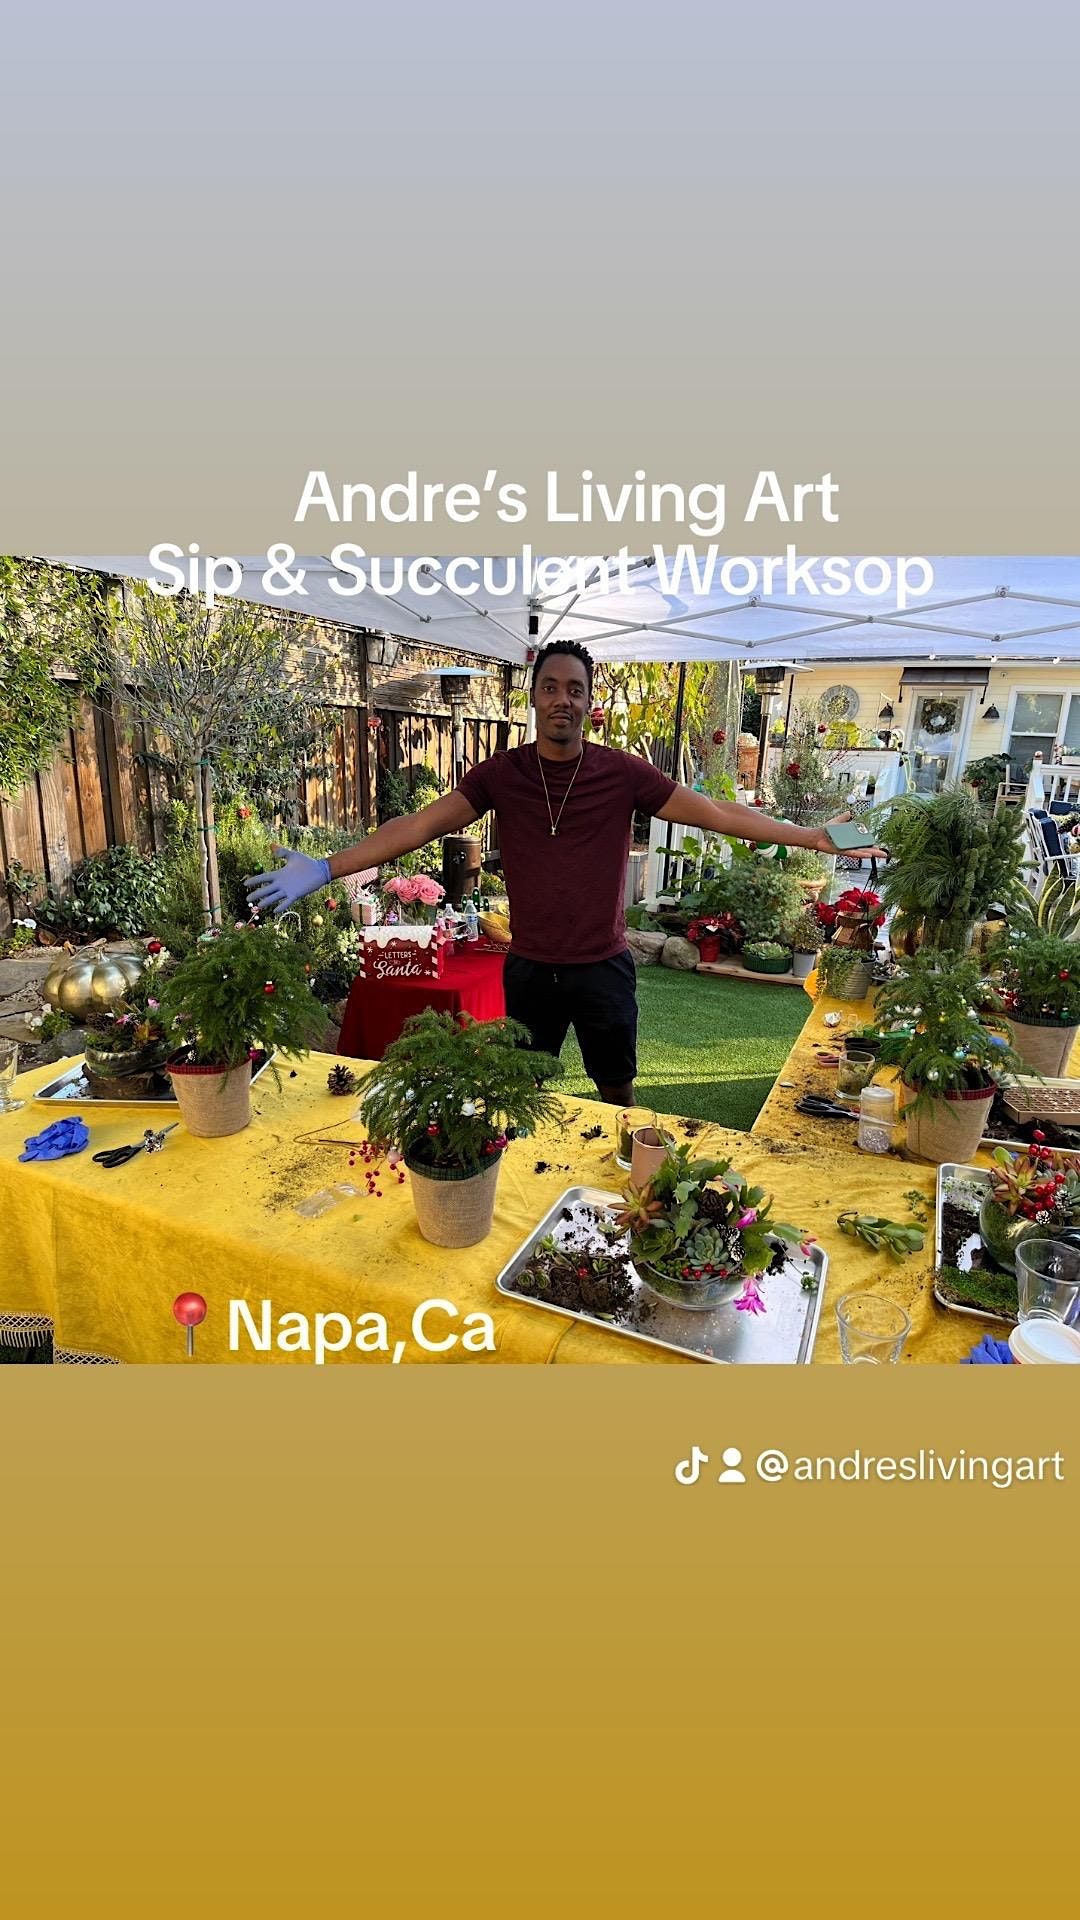 Sip & Succulent Workshop "The Elevated Experience"